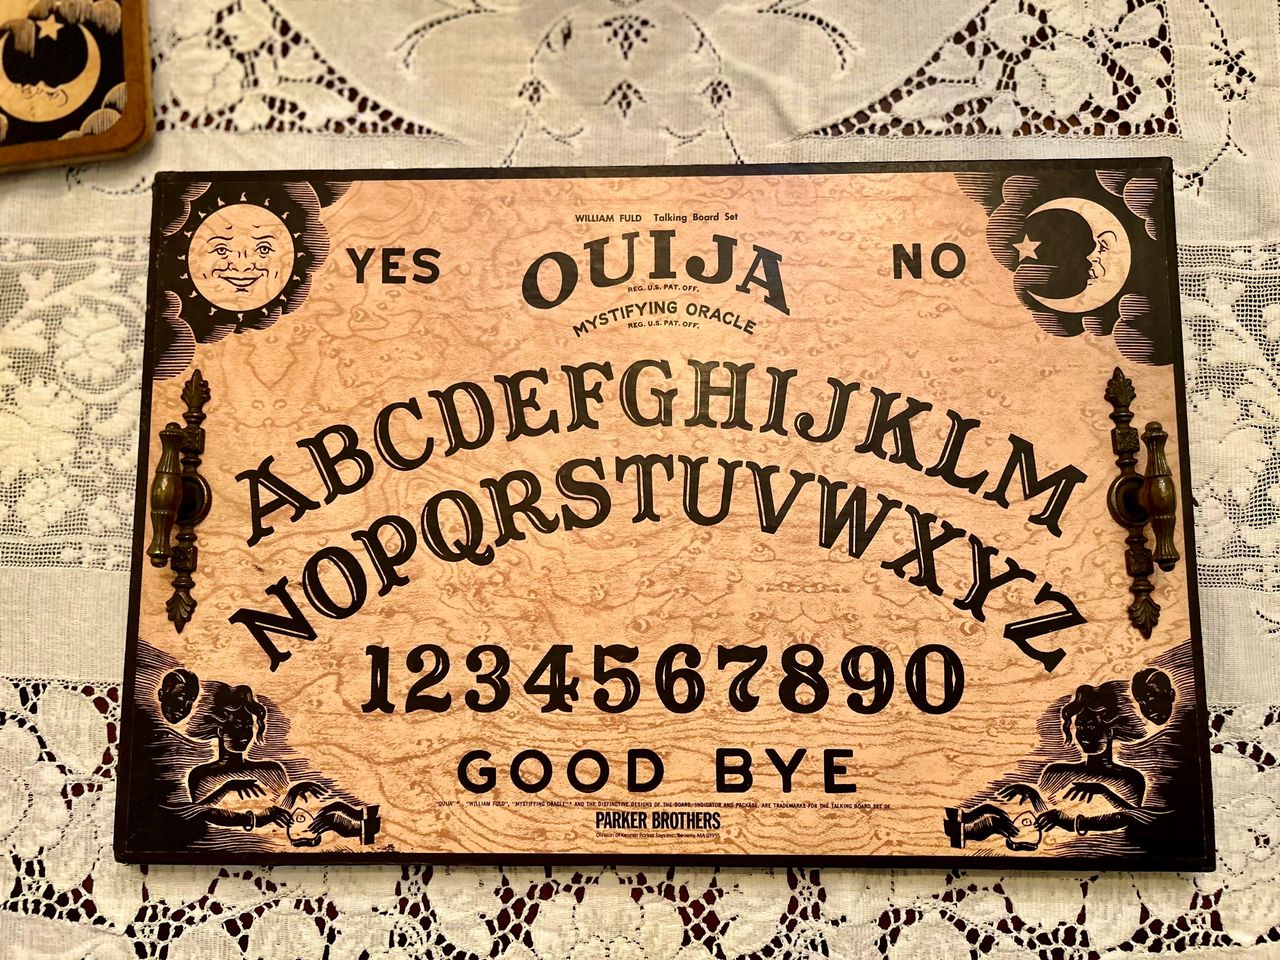 A vintage Ouija board found at a garage sale for $1 is up cycled into a Halloween tray.